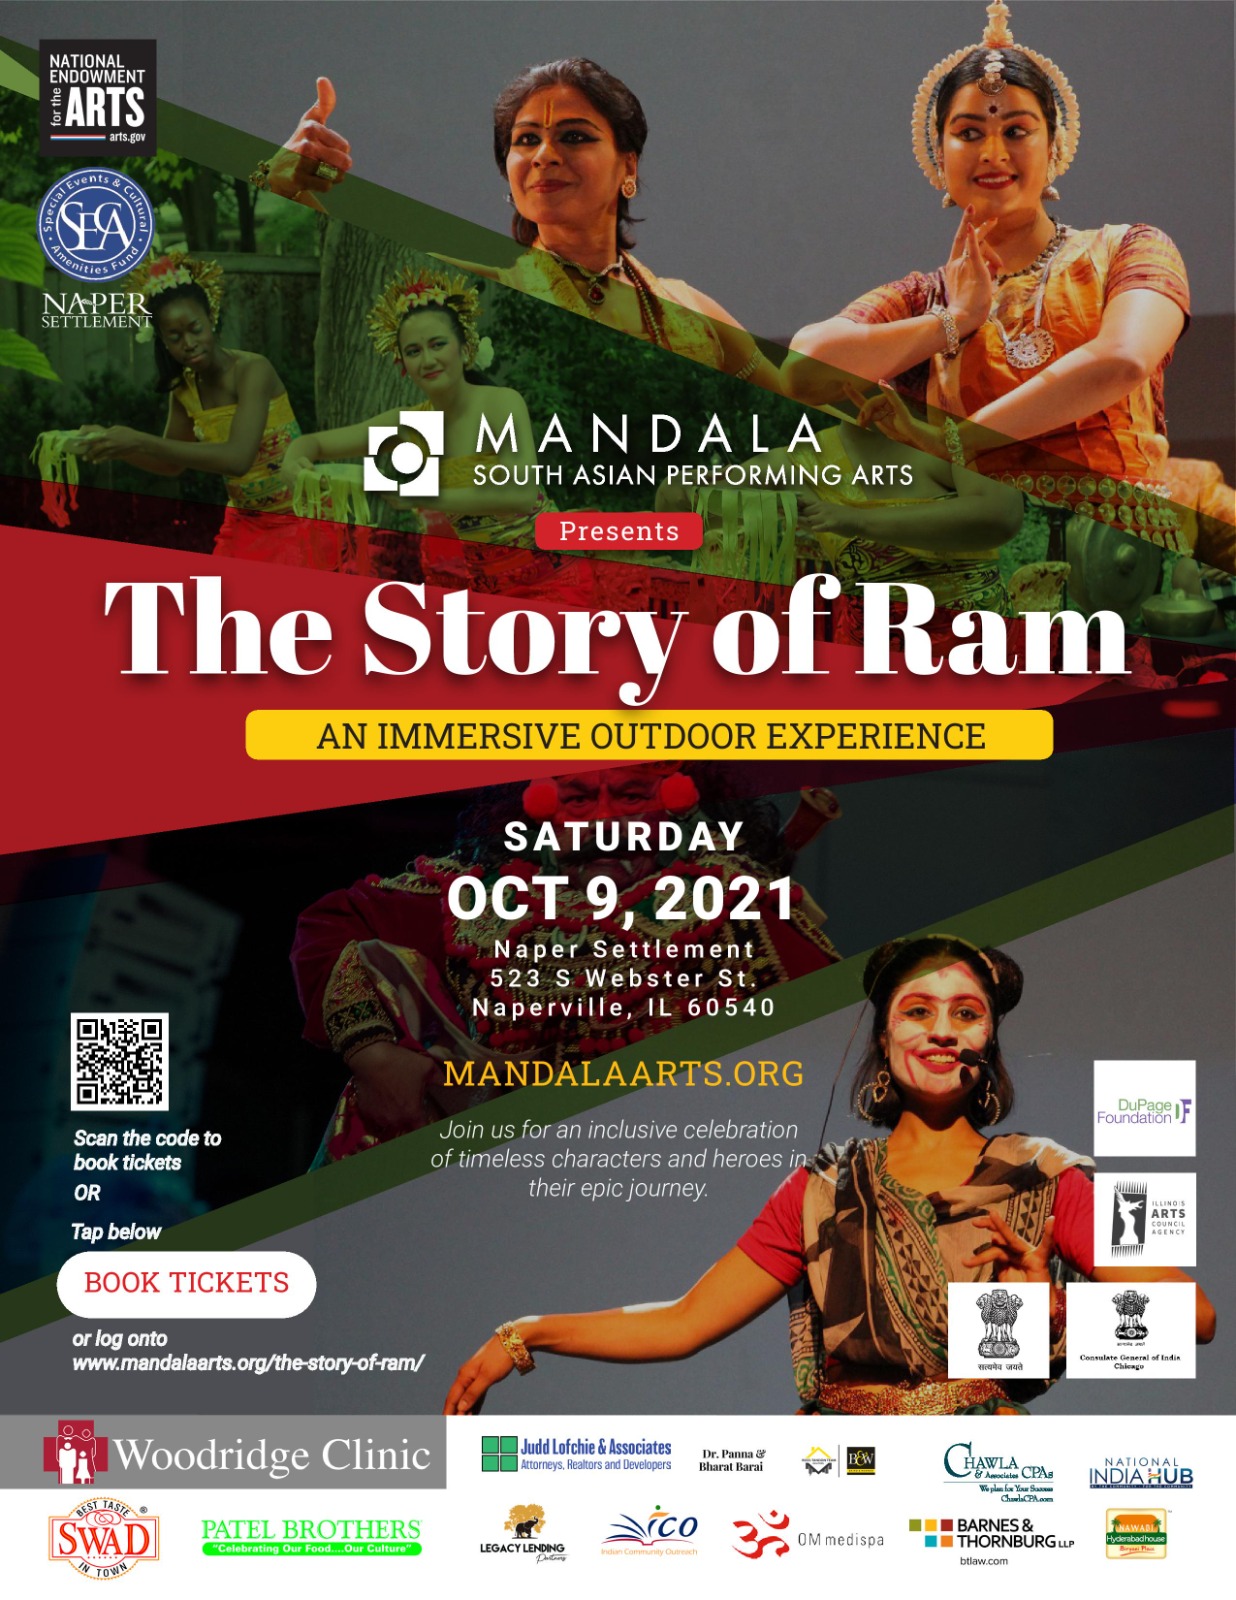 The Story of Ram - 2:00pm Show